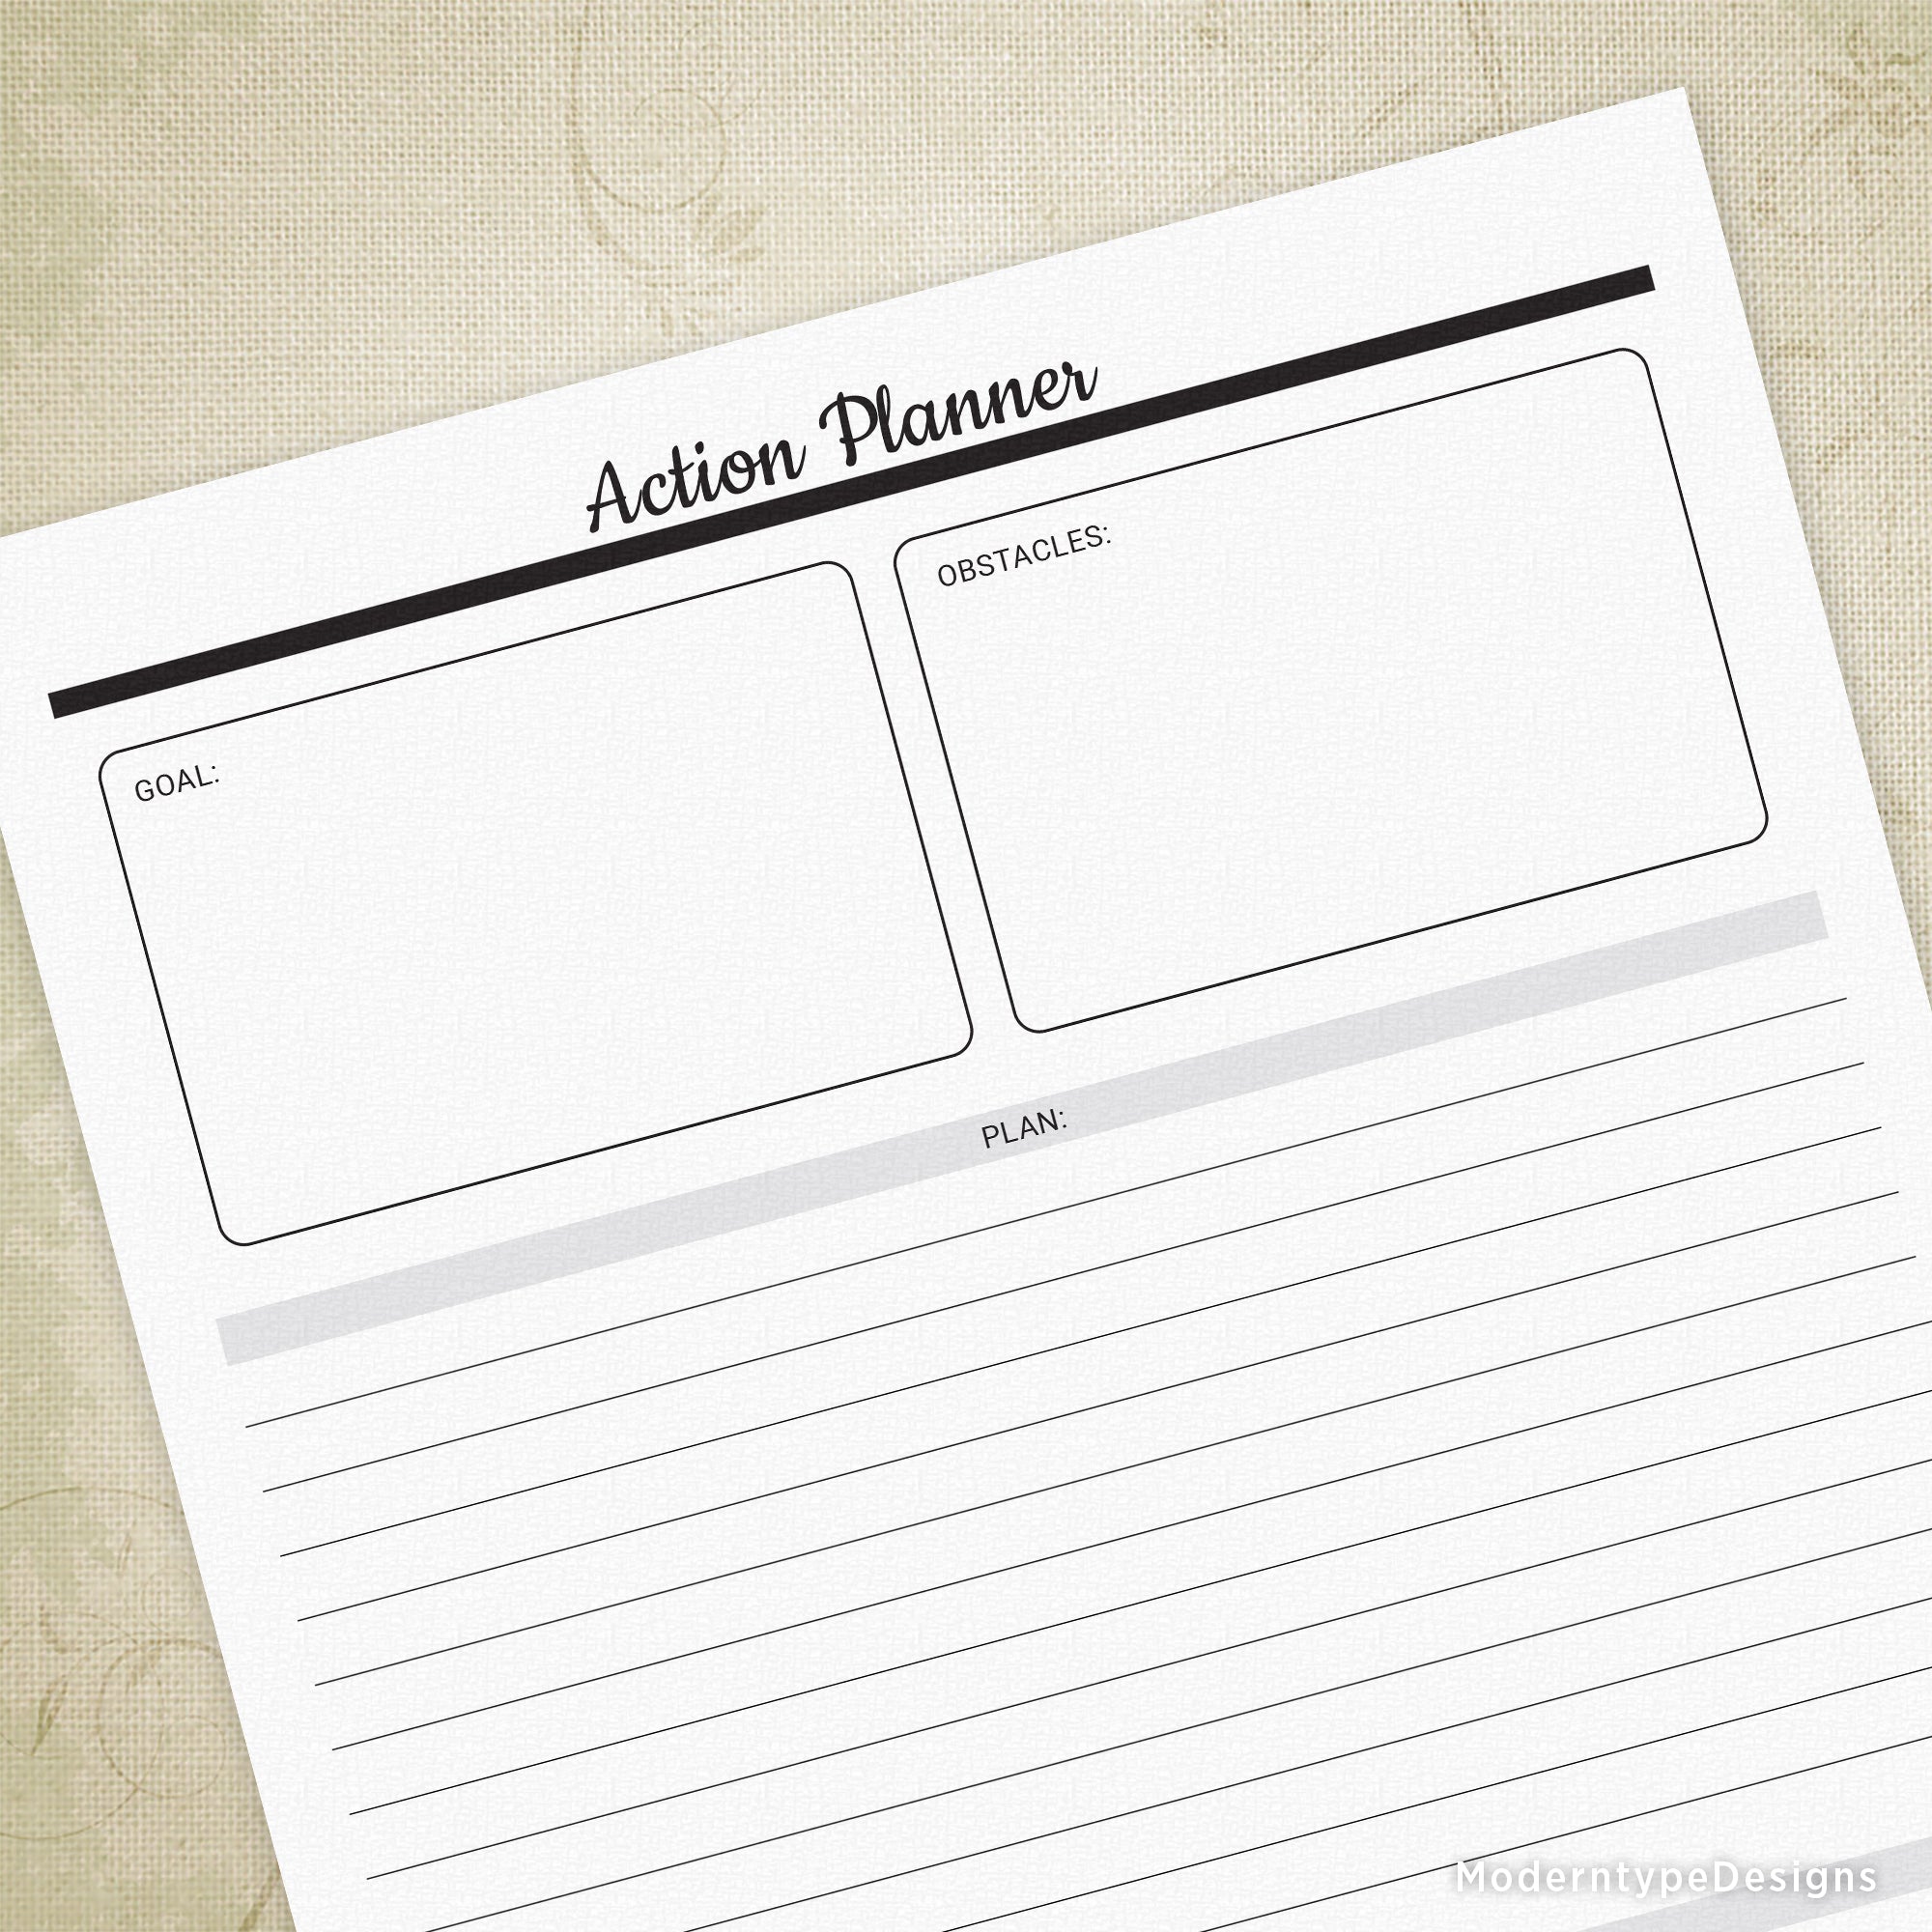 Action Planner Printable